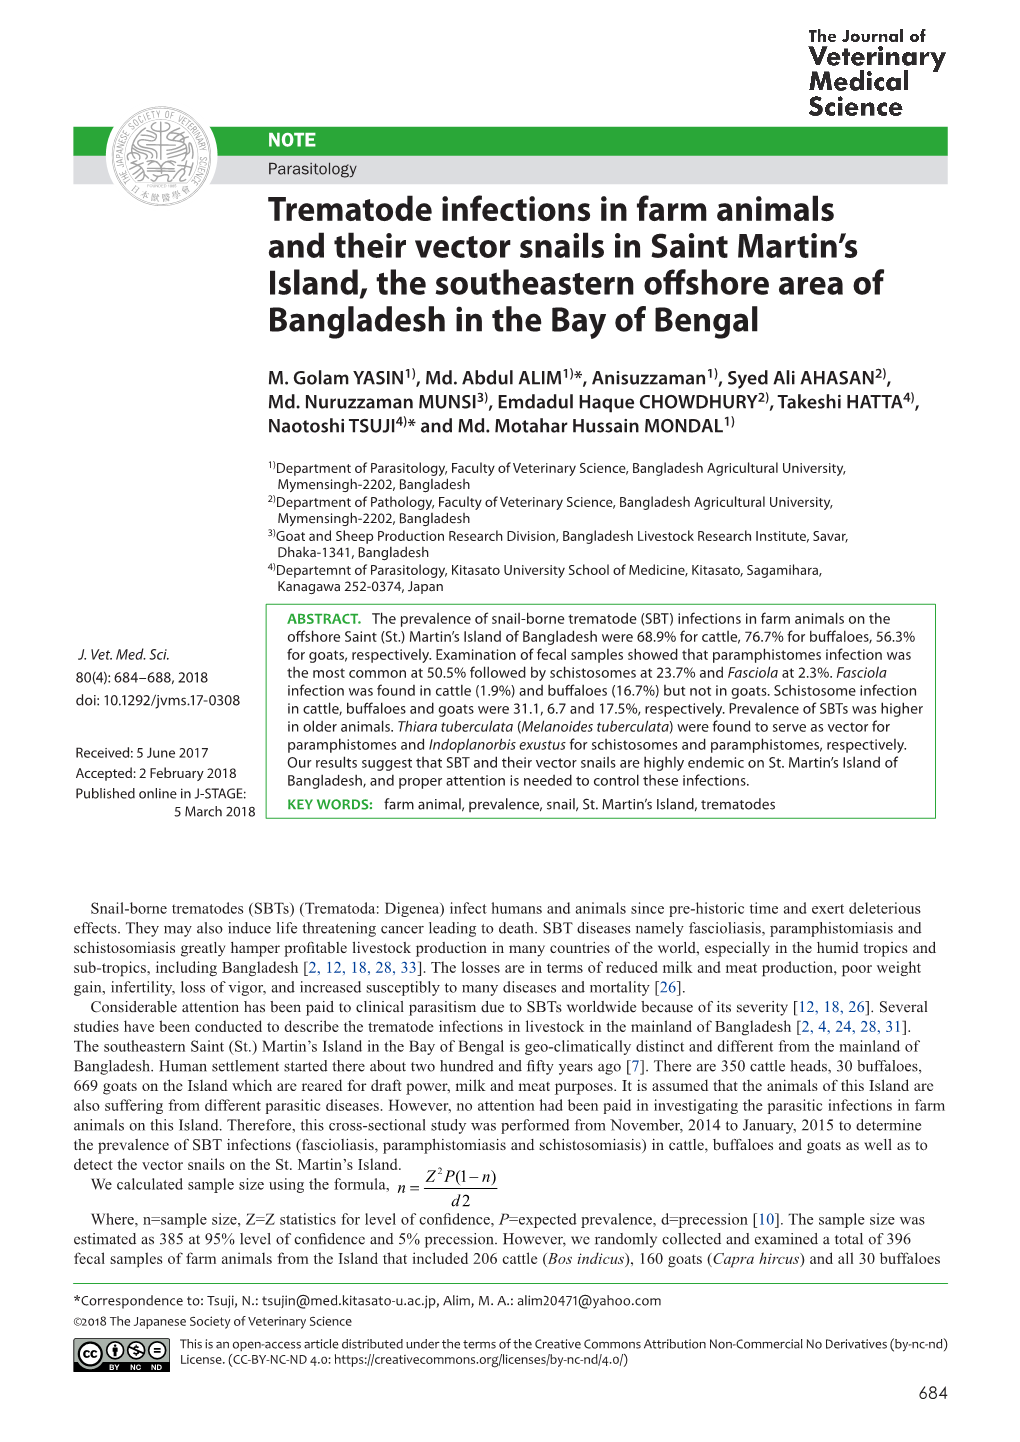 Trematode Infections in Farm Animals and Their Vector Snails in Saint Martin’S Island, the Southeastern Offshore Area of Bangladesh in the Bay of Bengal